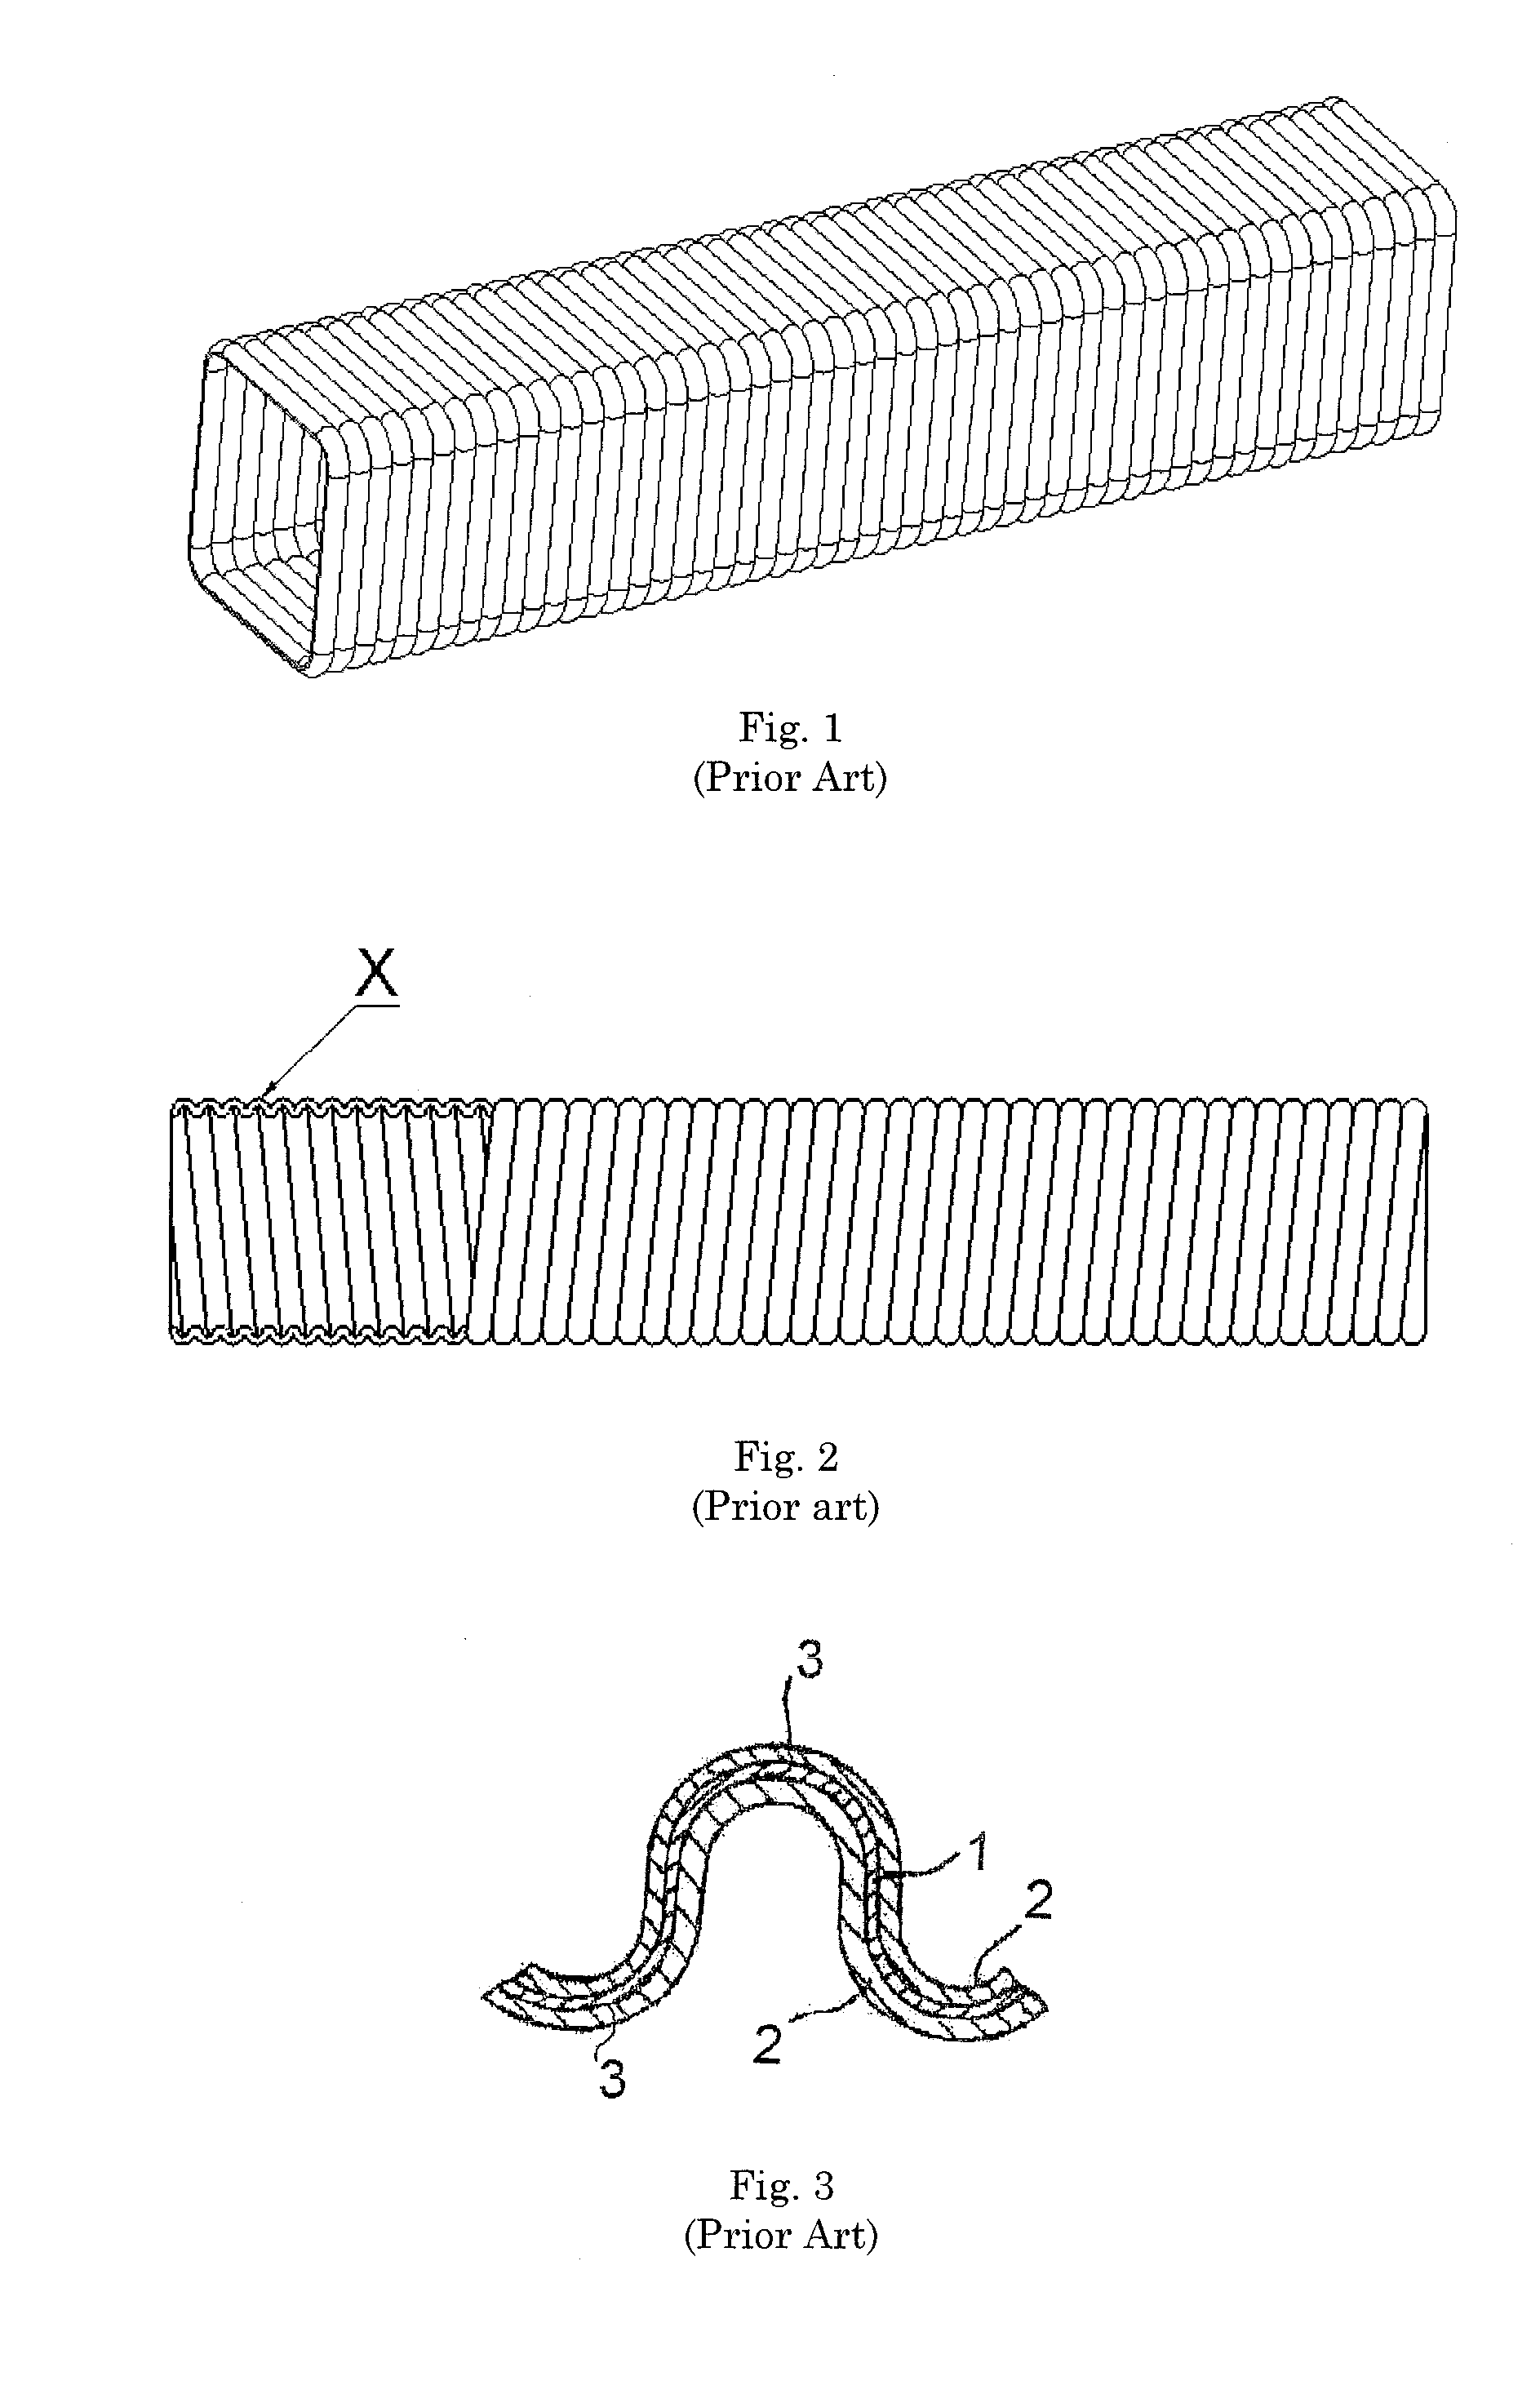 Corrugated tubular energy absorbing structure